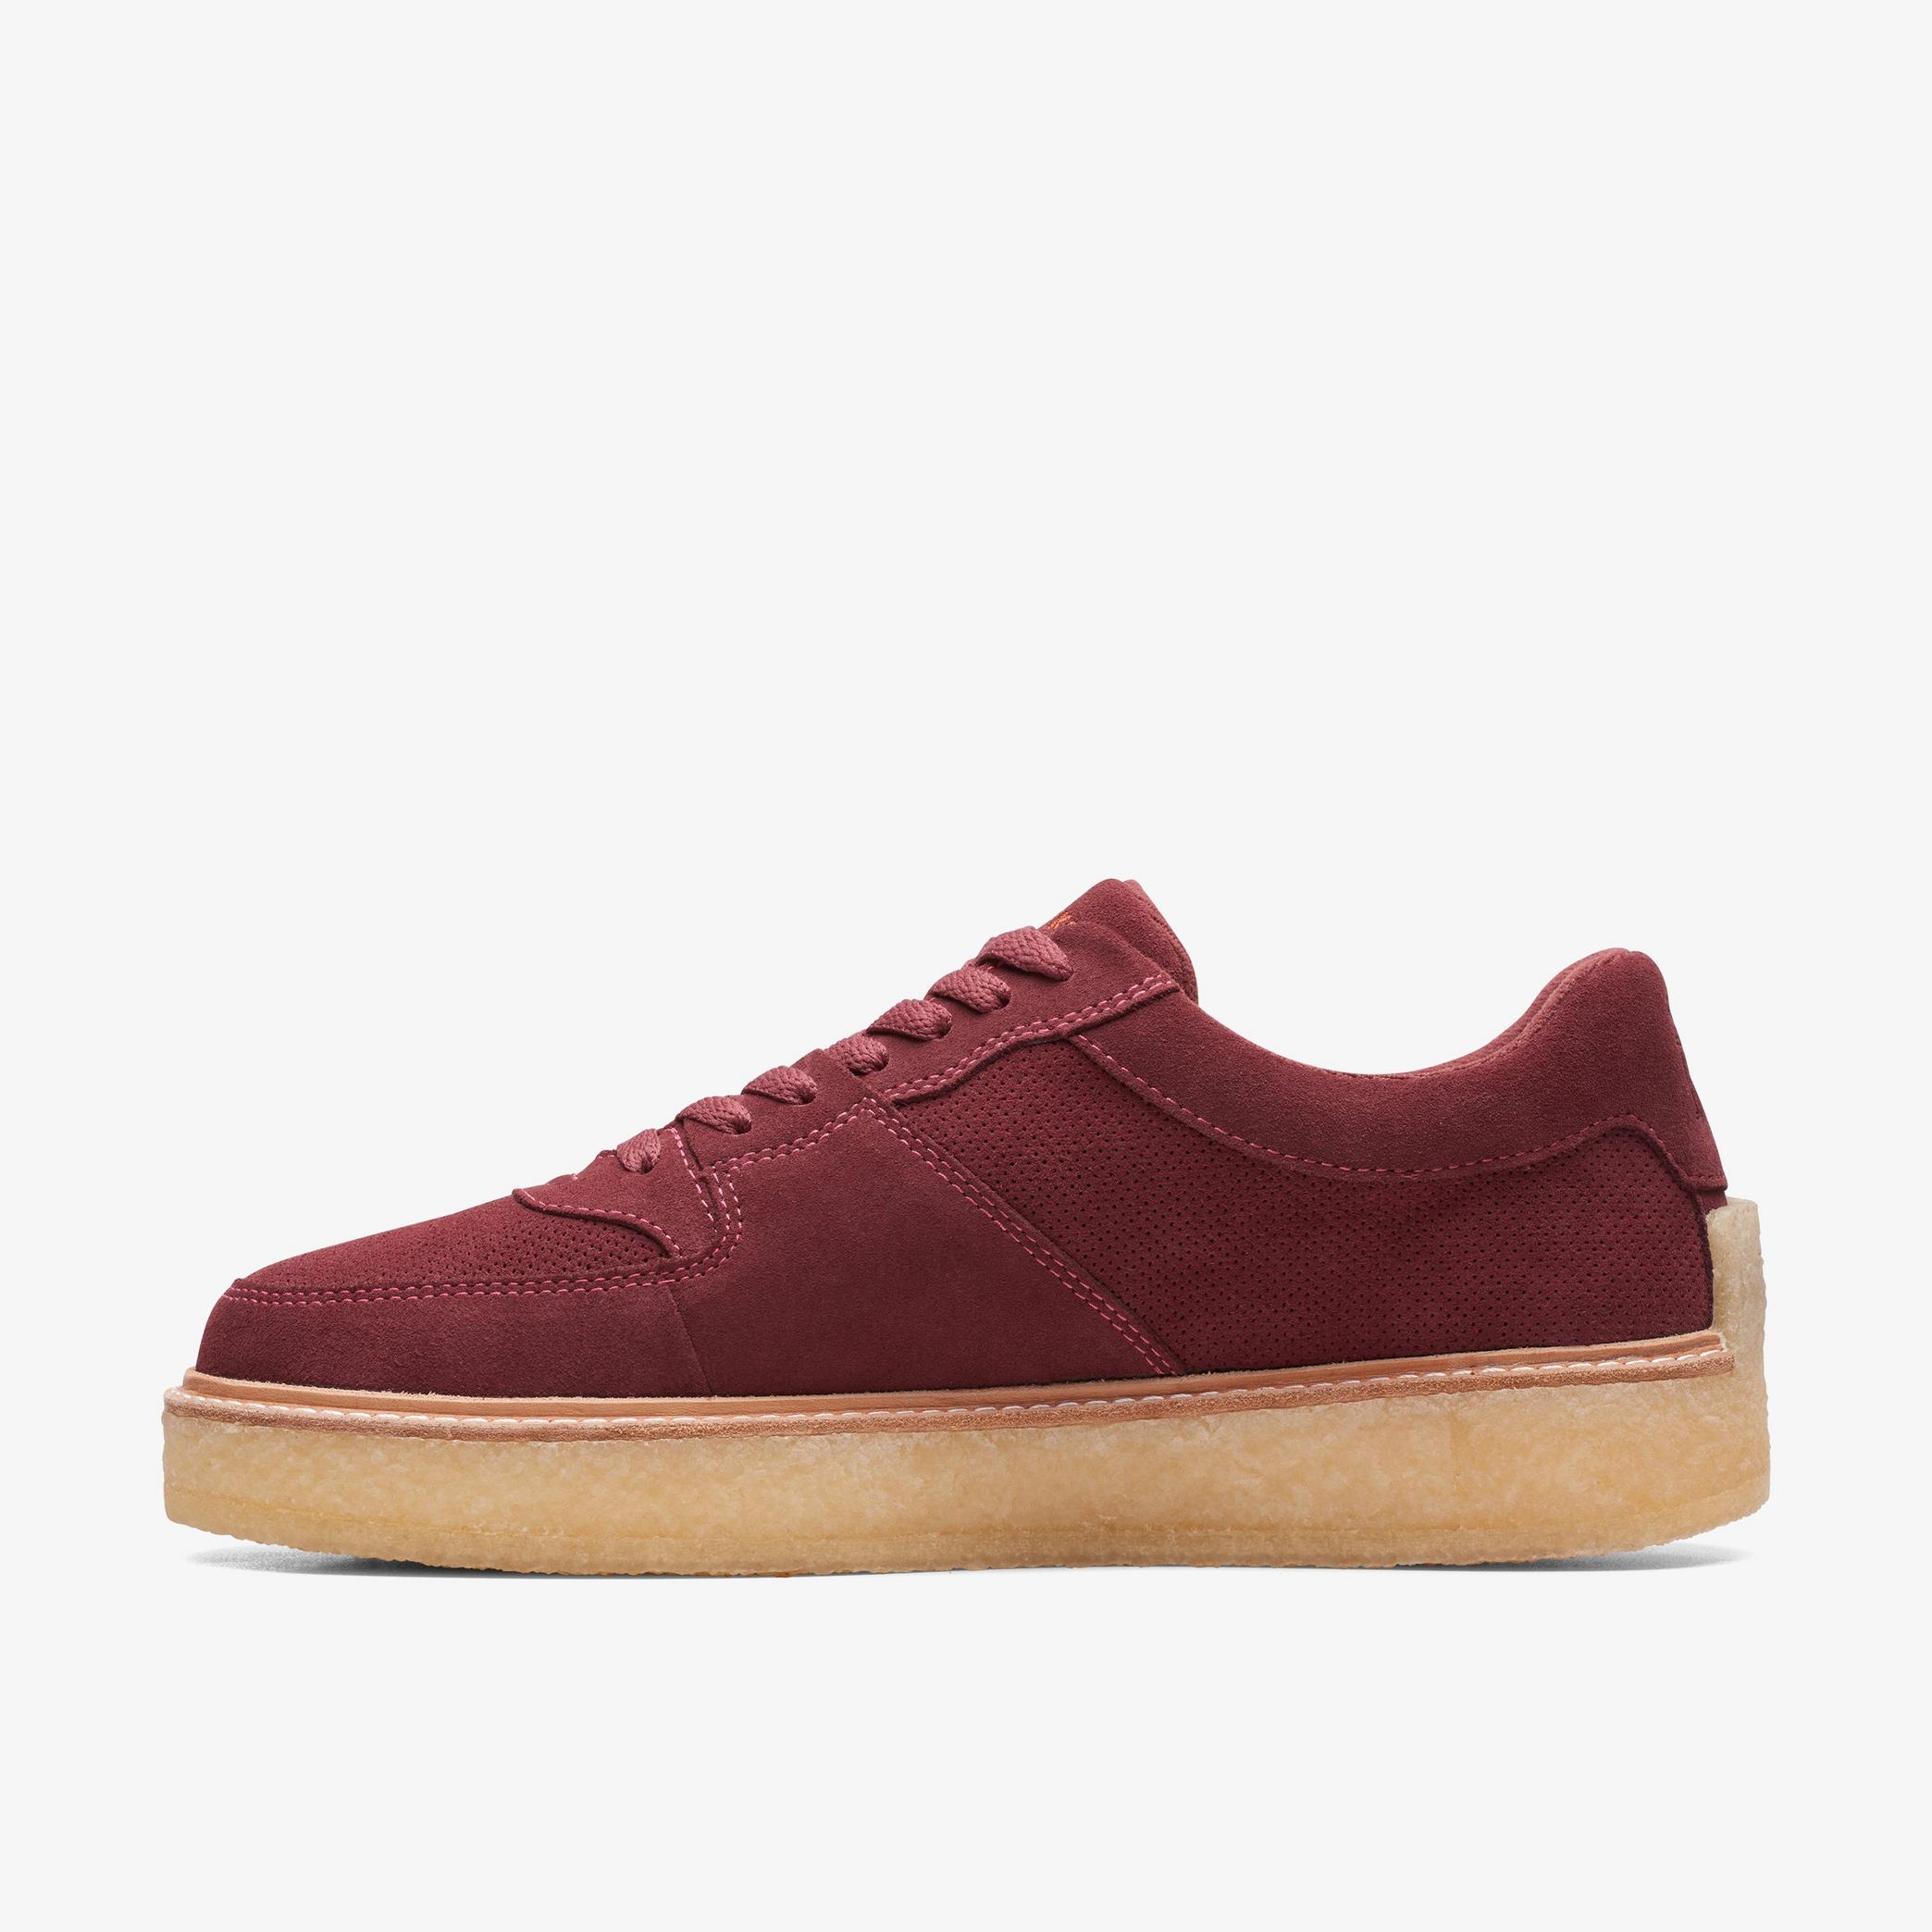 Sandford Oxblood Trainers, view 2 of 7